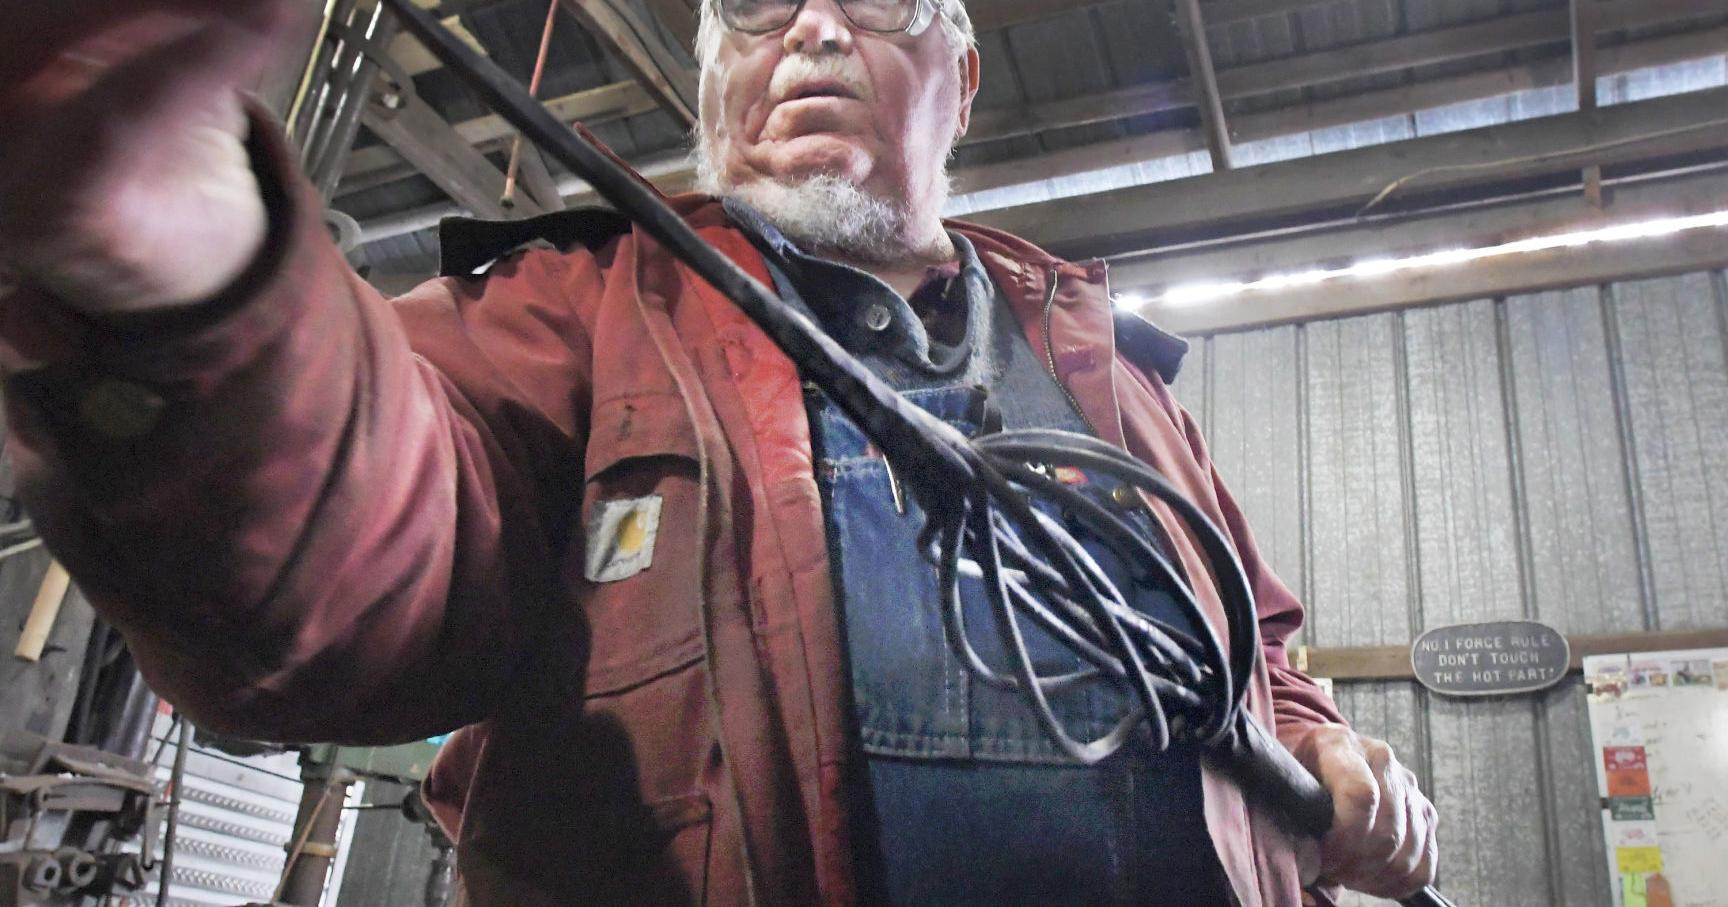 Listen now: Central Illinois blacksmiths 'forged in fire'